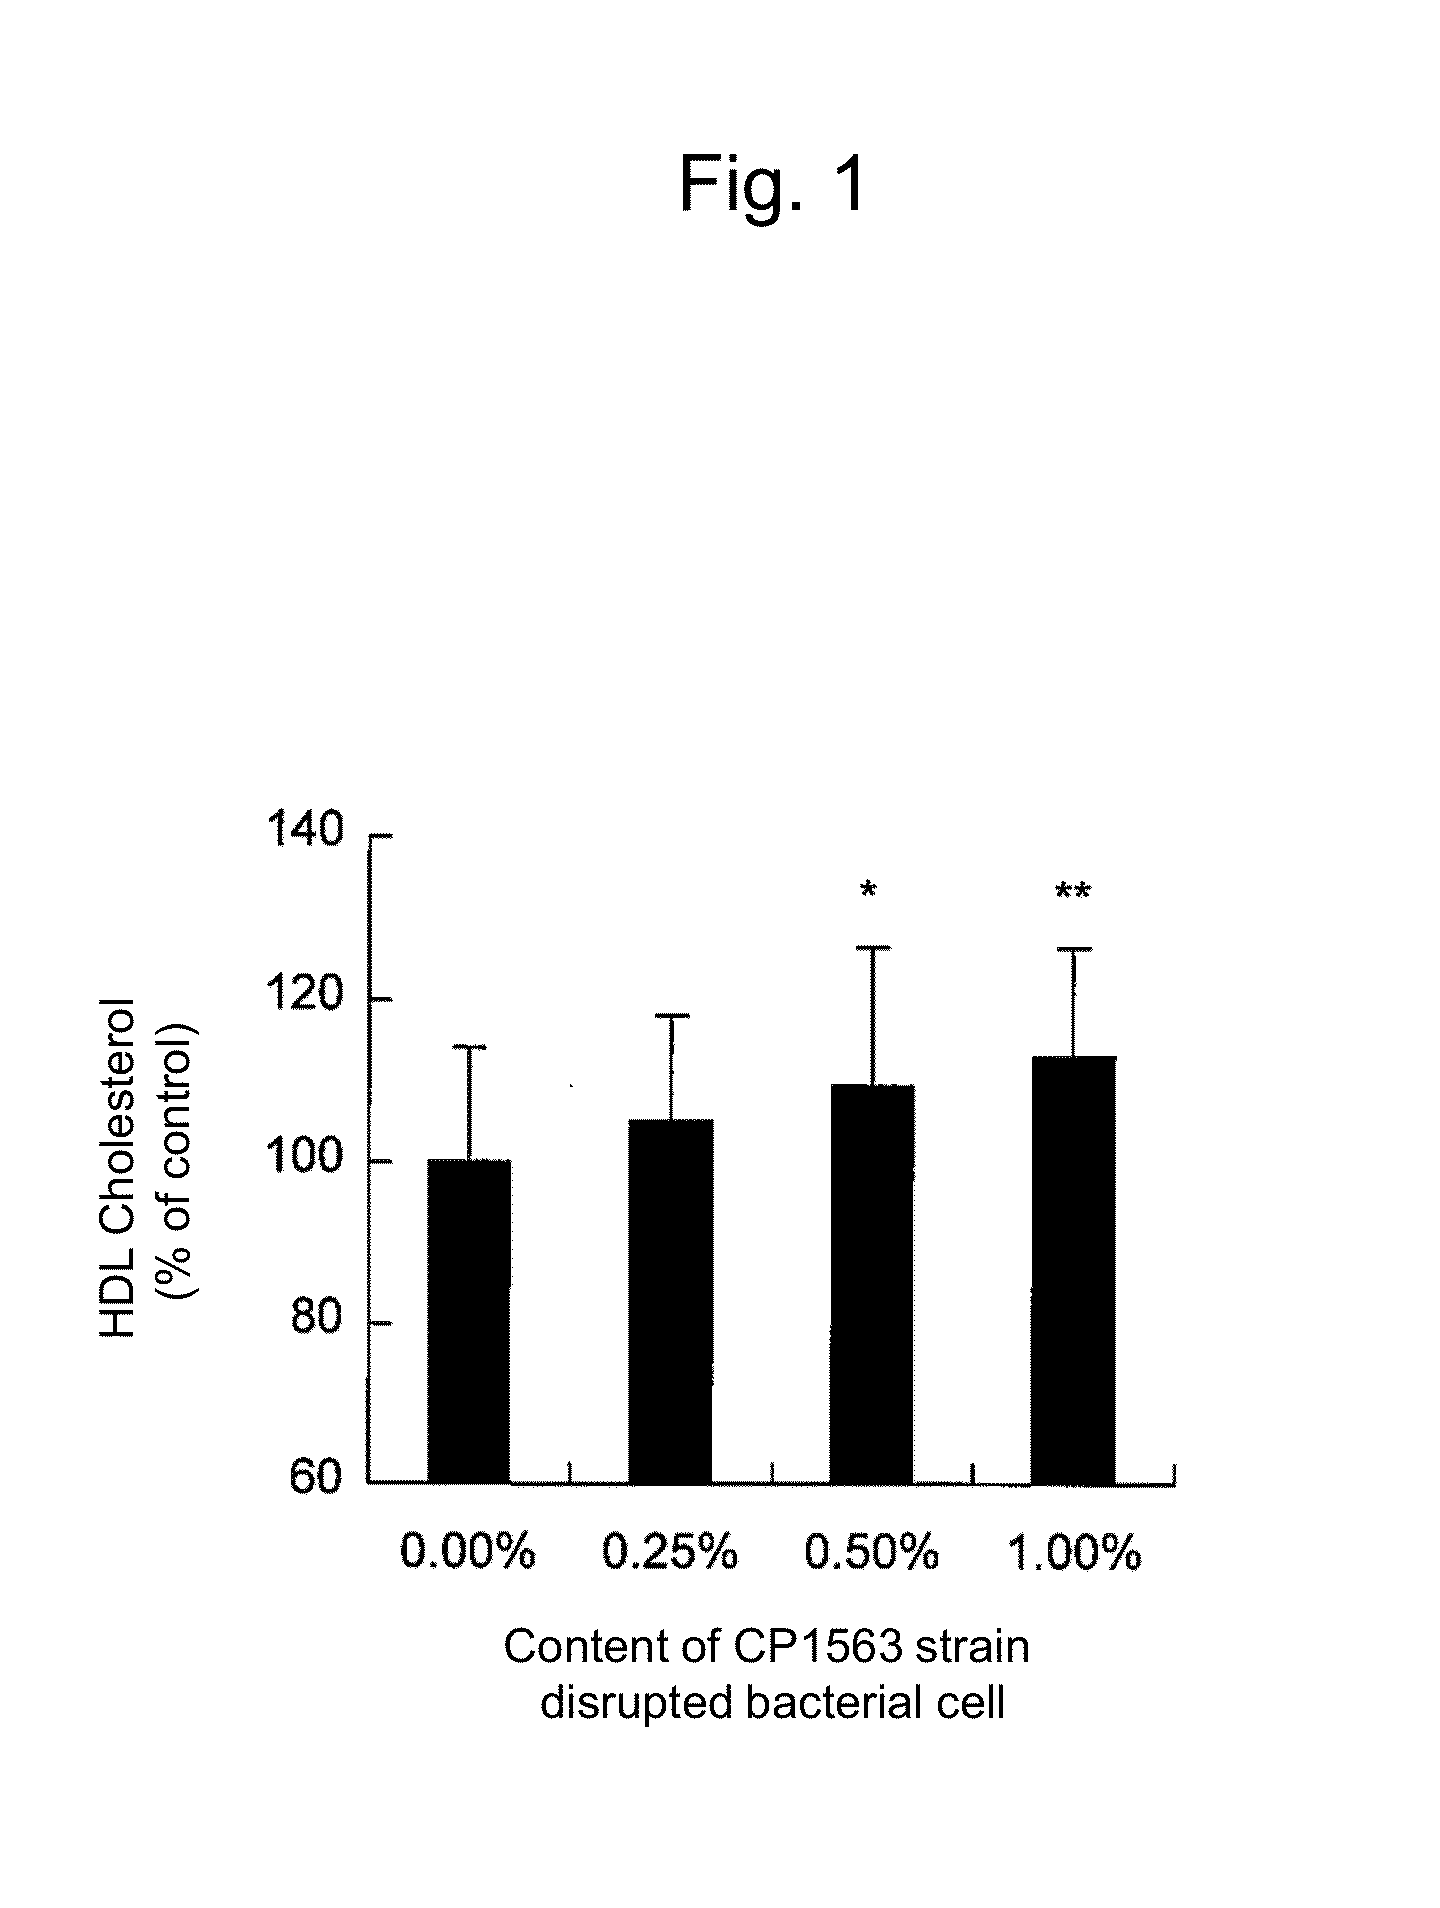 Lipid metabolism and/or sugar metabolism improver containing lactic acid bacterium or treatment product thereof